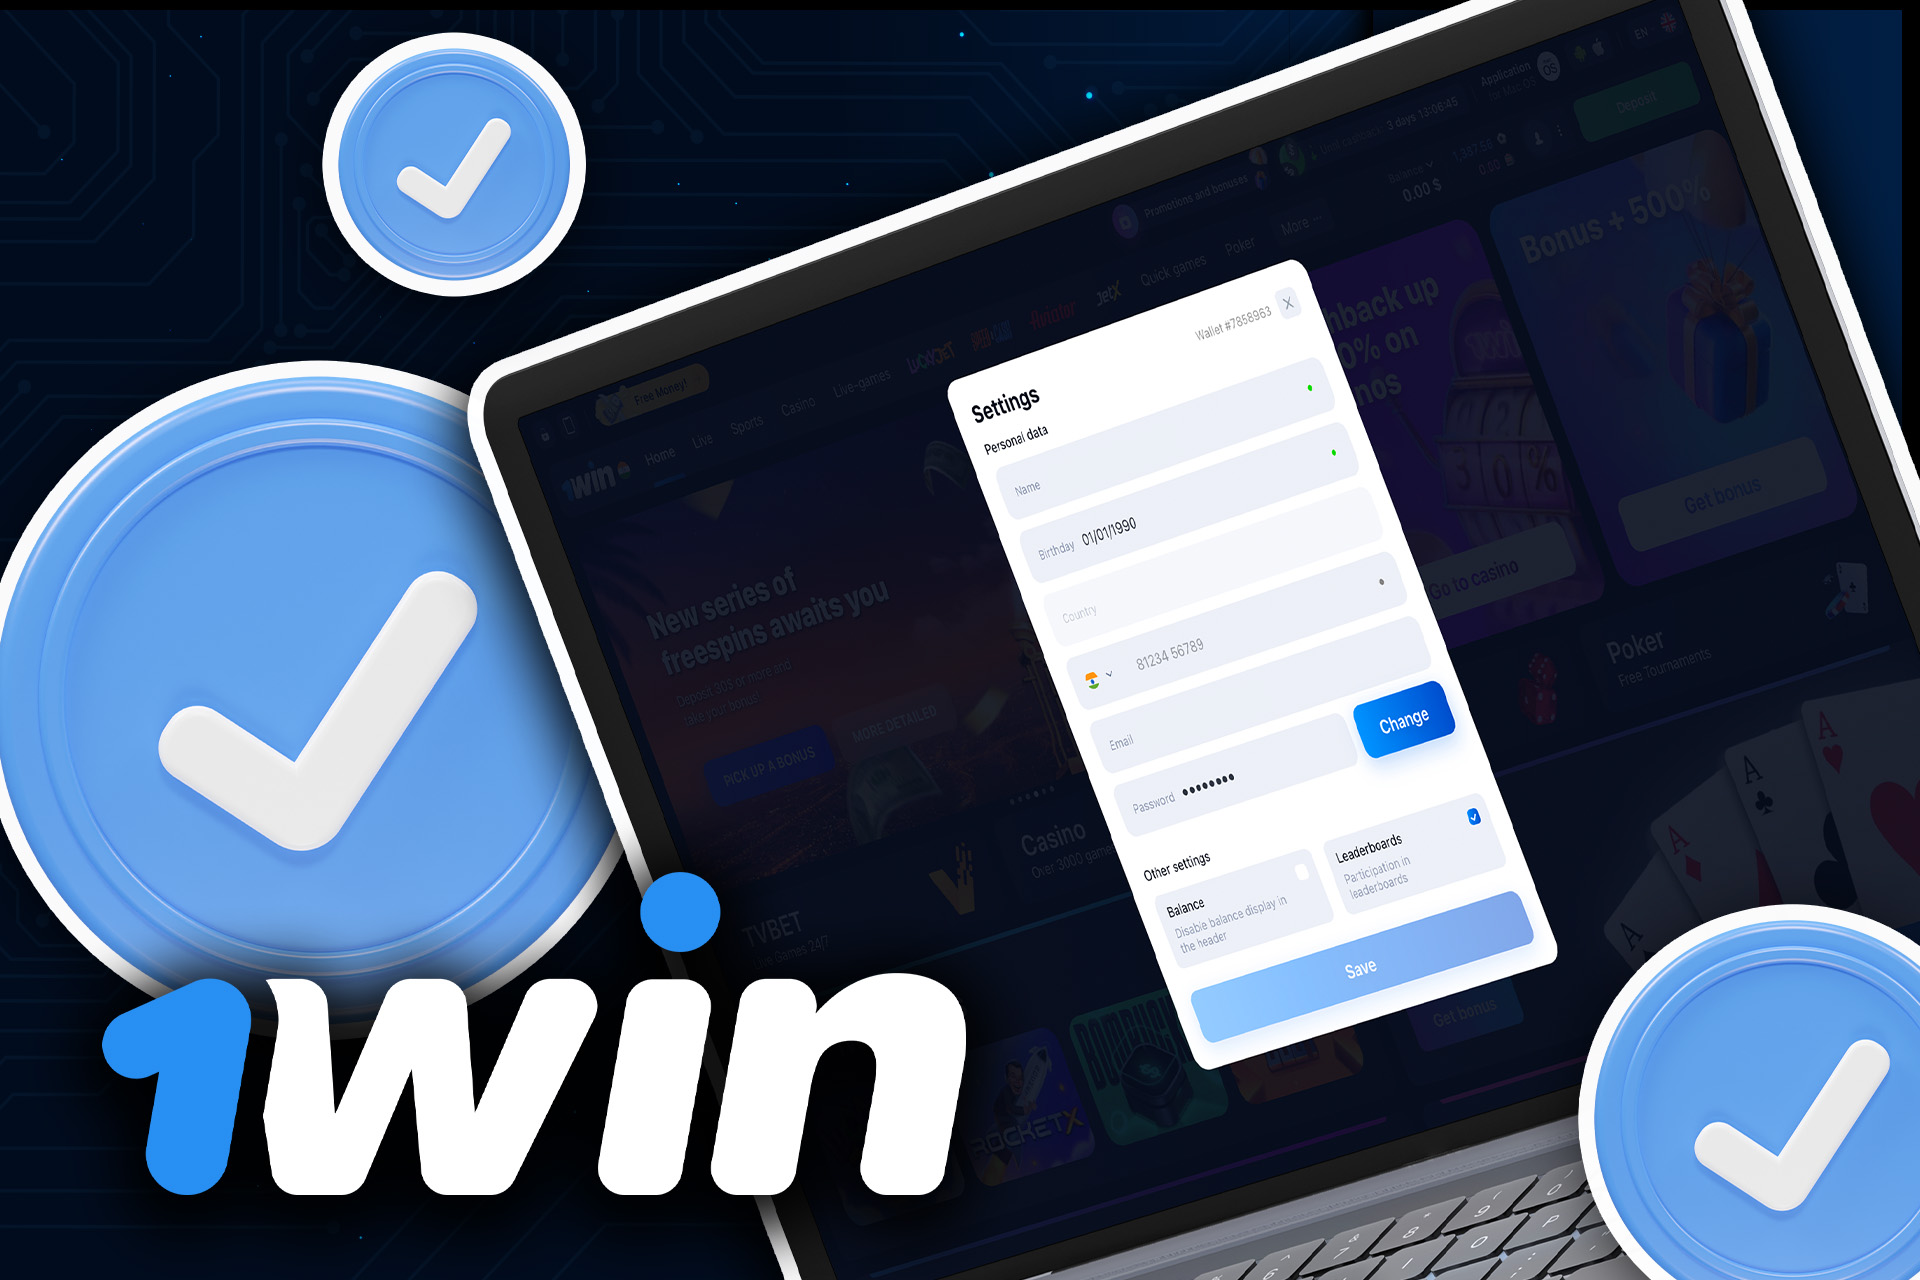 Each 1win user should verify his account in order to place bets and play casino without limits.